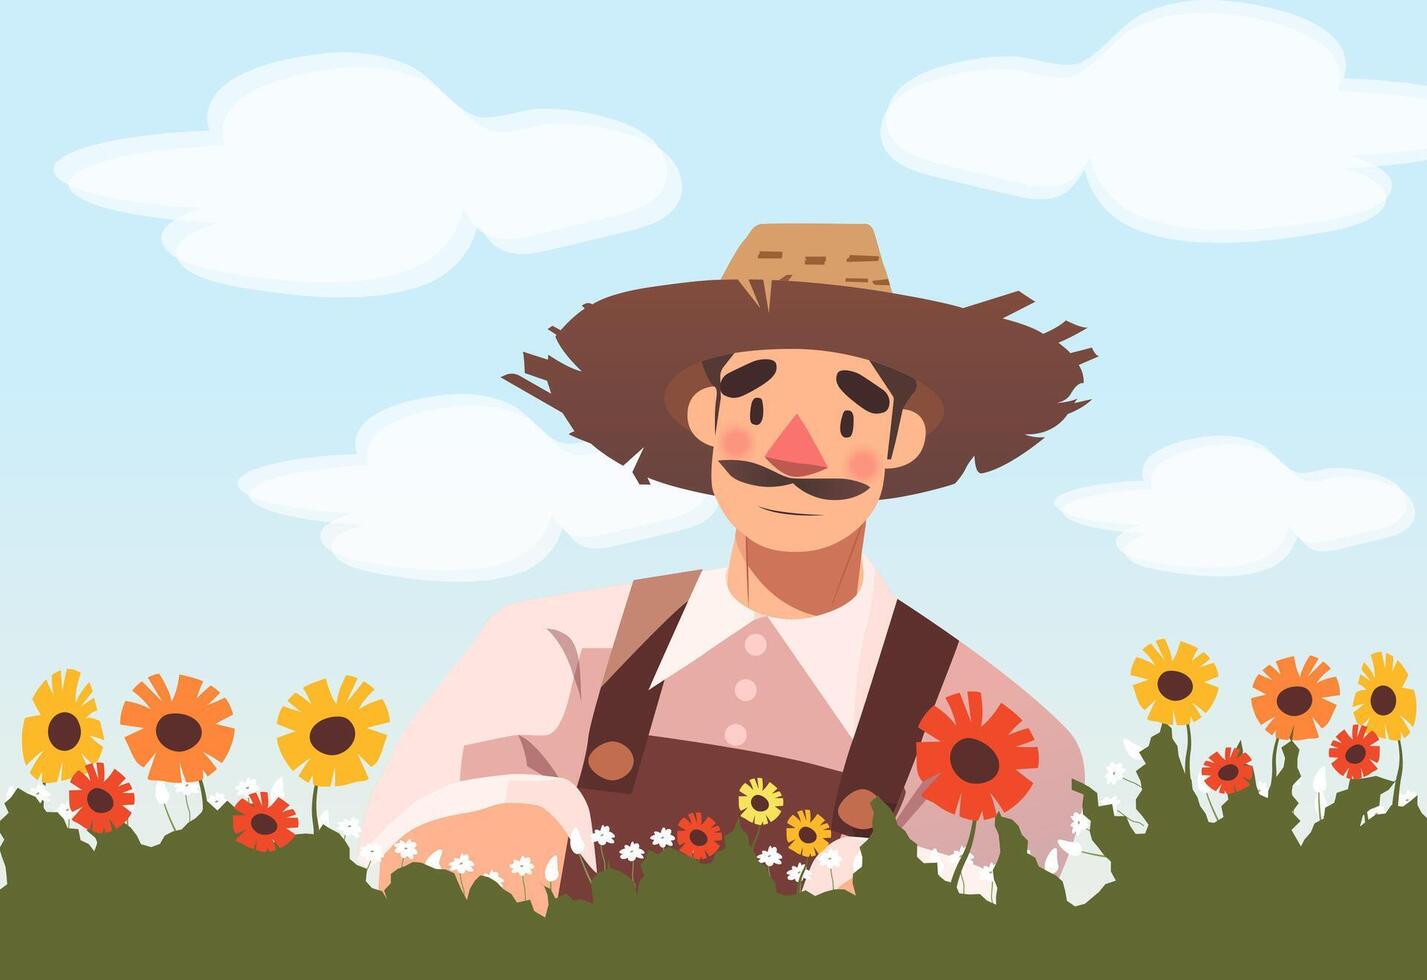 Rural farmer with colorful flowers in beautiful green garden with blue sky landscape cartoon illustration vector